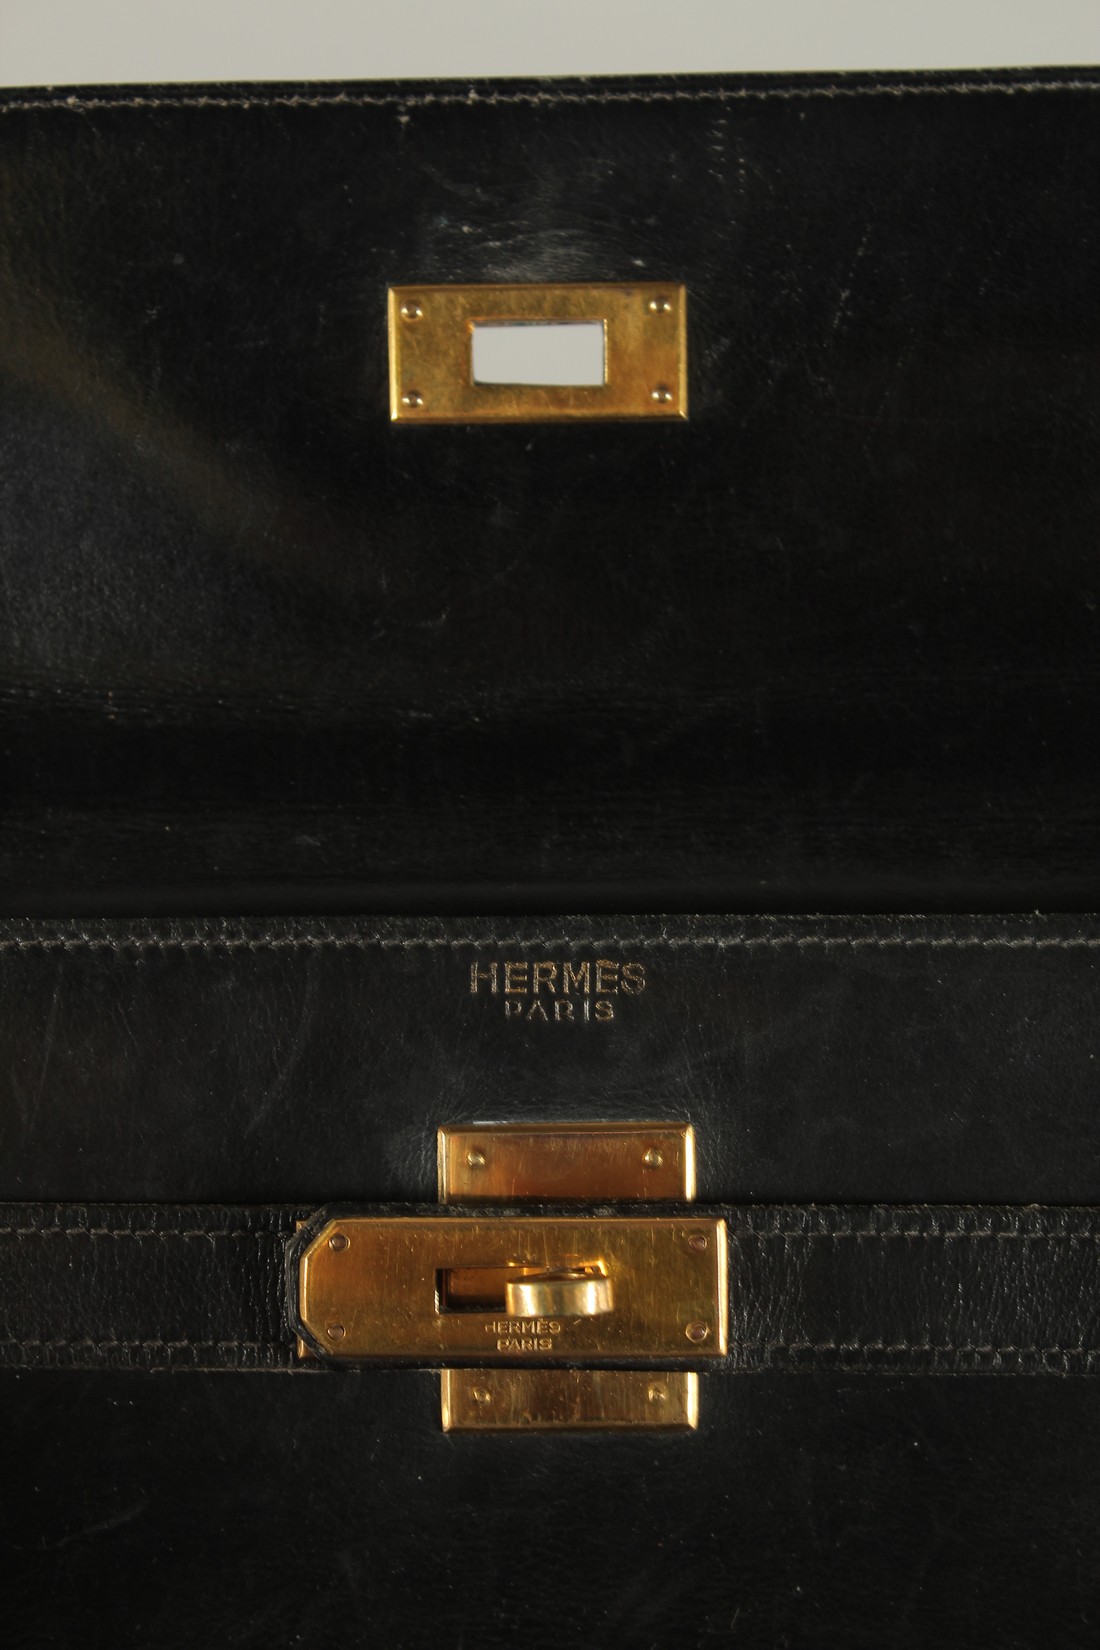 A VERY GOOD VINTAGE HERMES BLACK LEATHER BAG, 1963. 36cms long x 26cms deep x 13cms wide, with a - Image 3 of 7